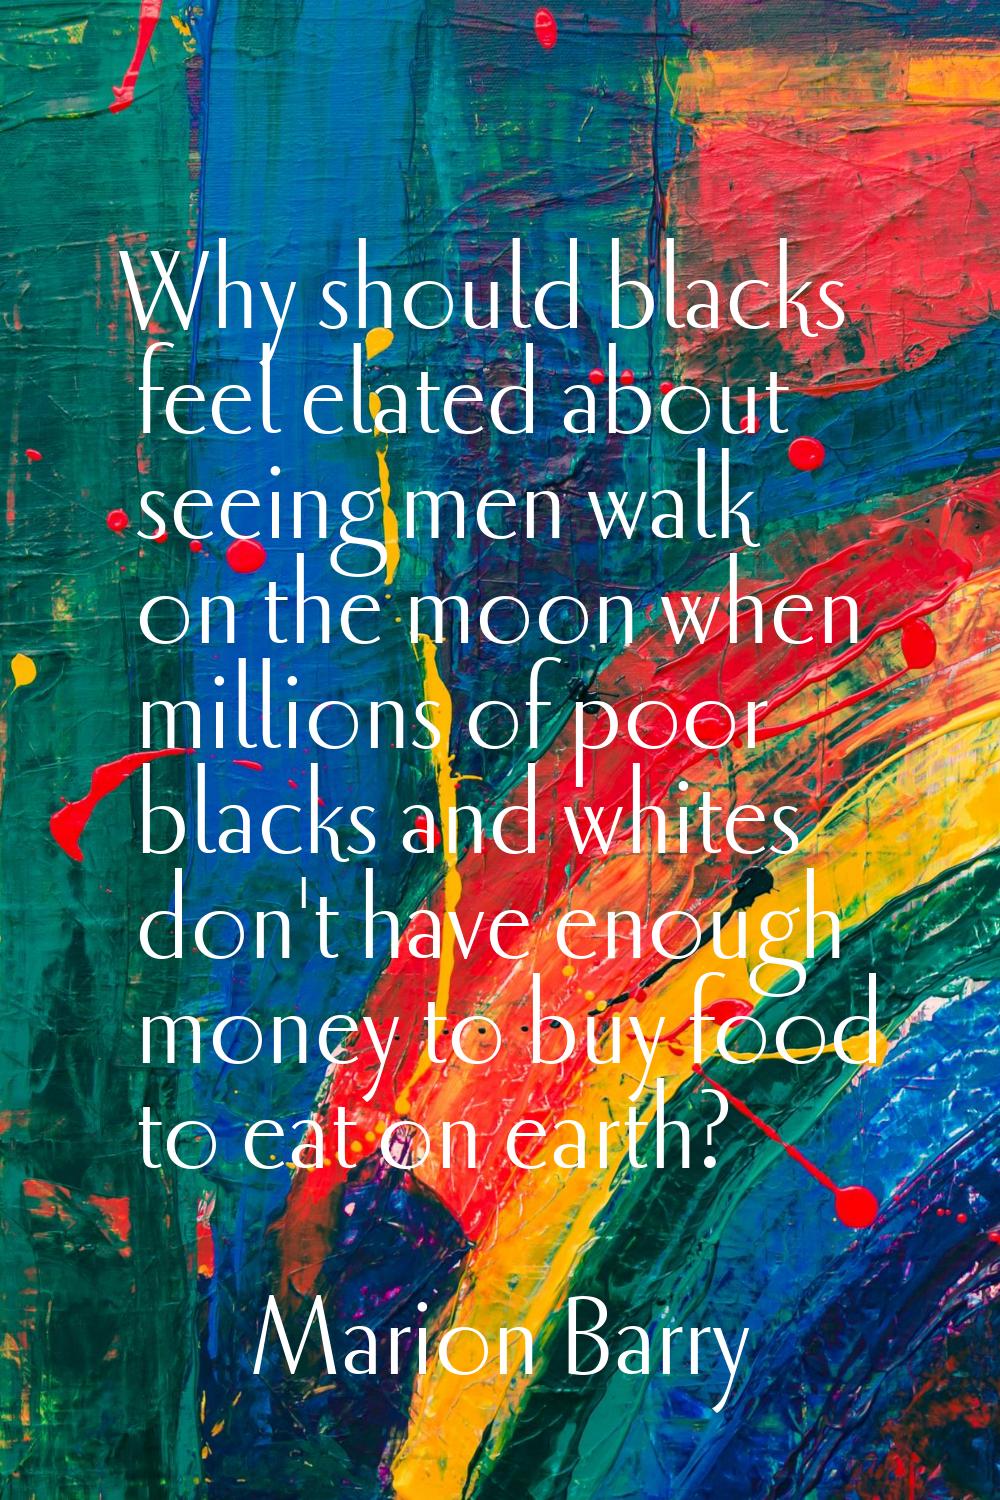 Why should blacks feel elated about seeing men walk on the moon when millions of poor blacks and wh